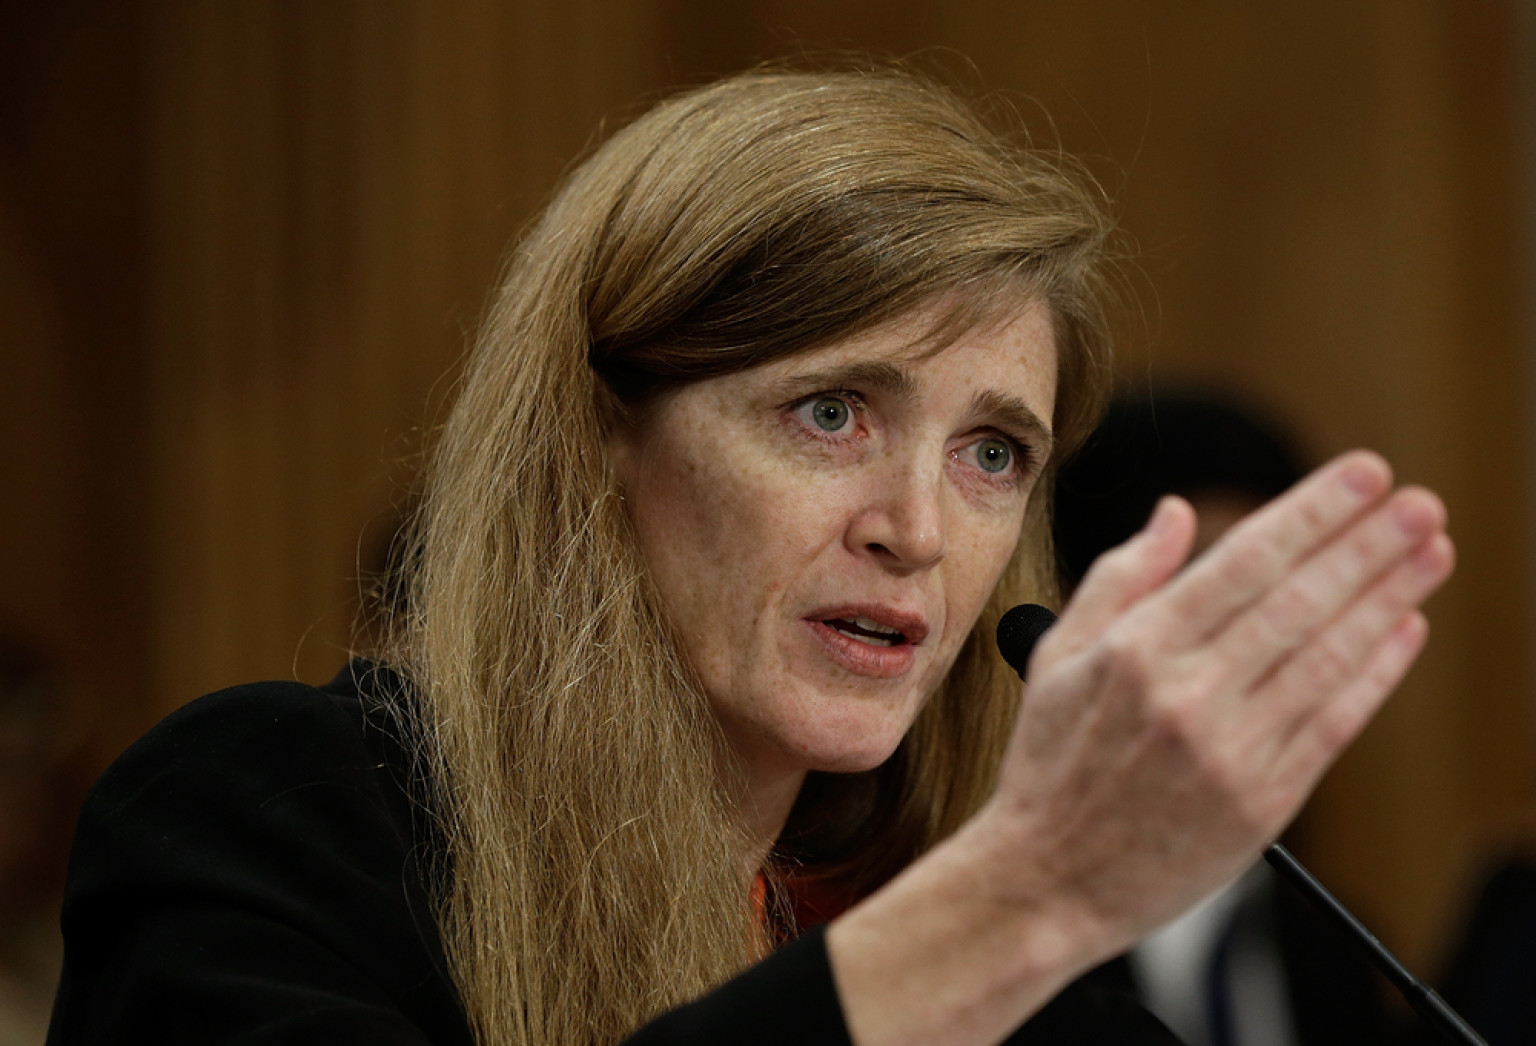 WASHINGTON, DC - JULY 17:  Samantha Power, the nominee to be the U.S. representative to the United Nations, testifies before the Senate Foreign Relations Committee July 17, 2013 in Washington, DC. Power has received broad bipartisan support for her nomination.  (Photo by Win McNamee/Getty Images)